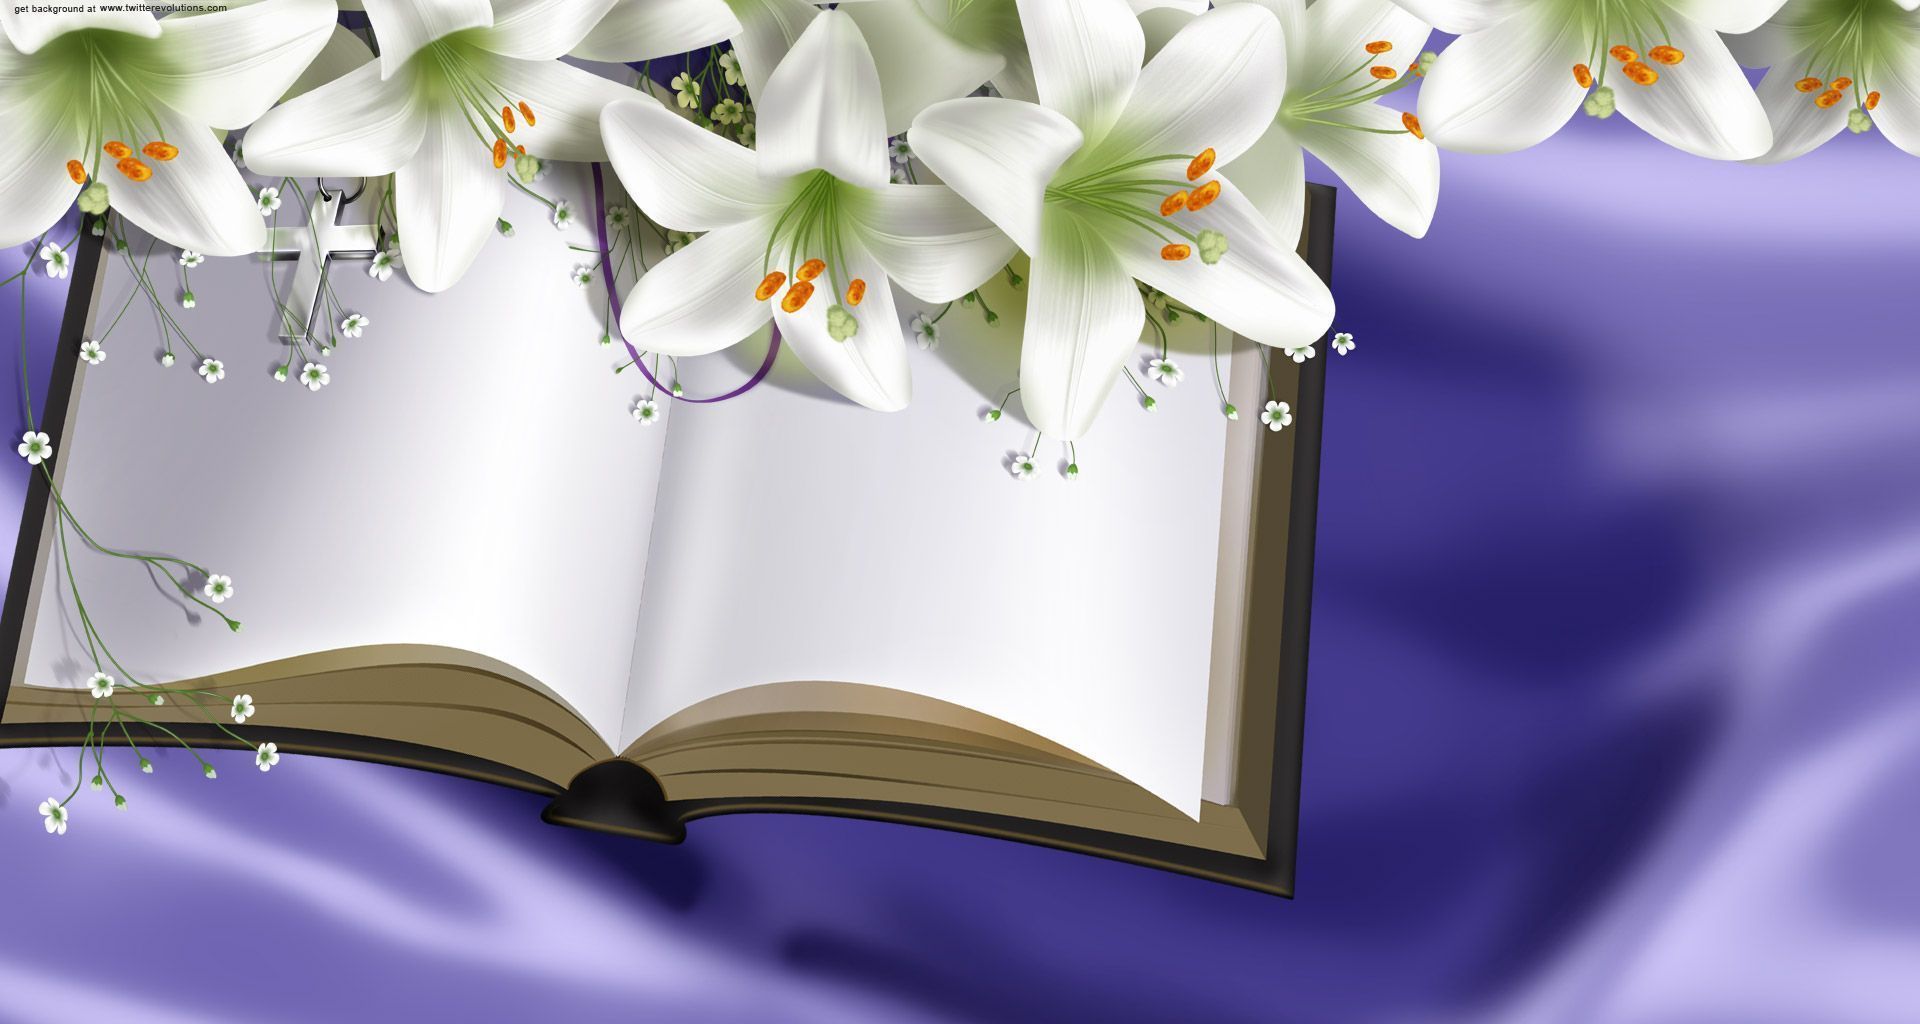 Book and flowers Twitter background - Twitterevolutions